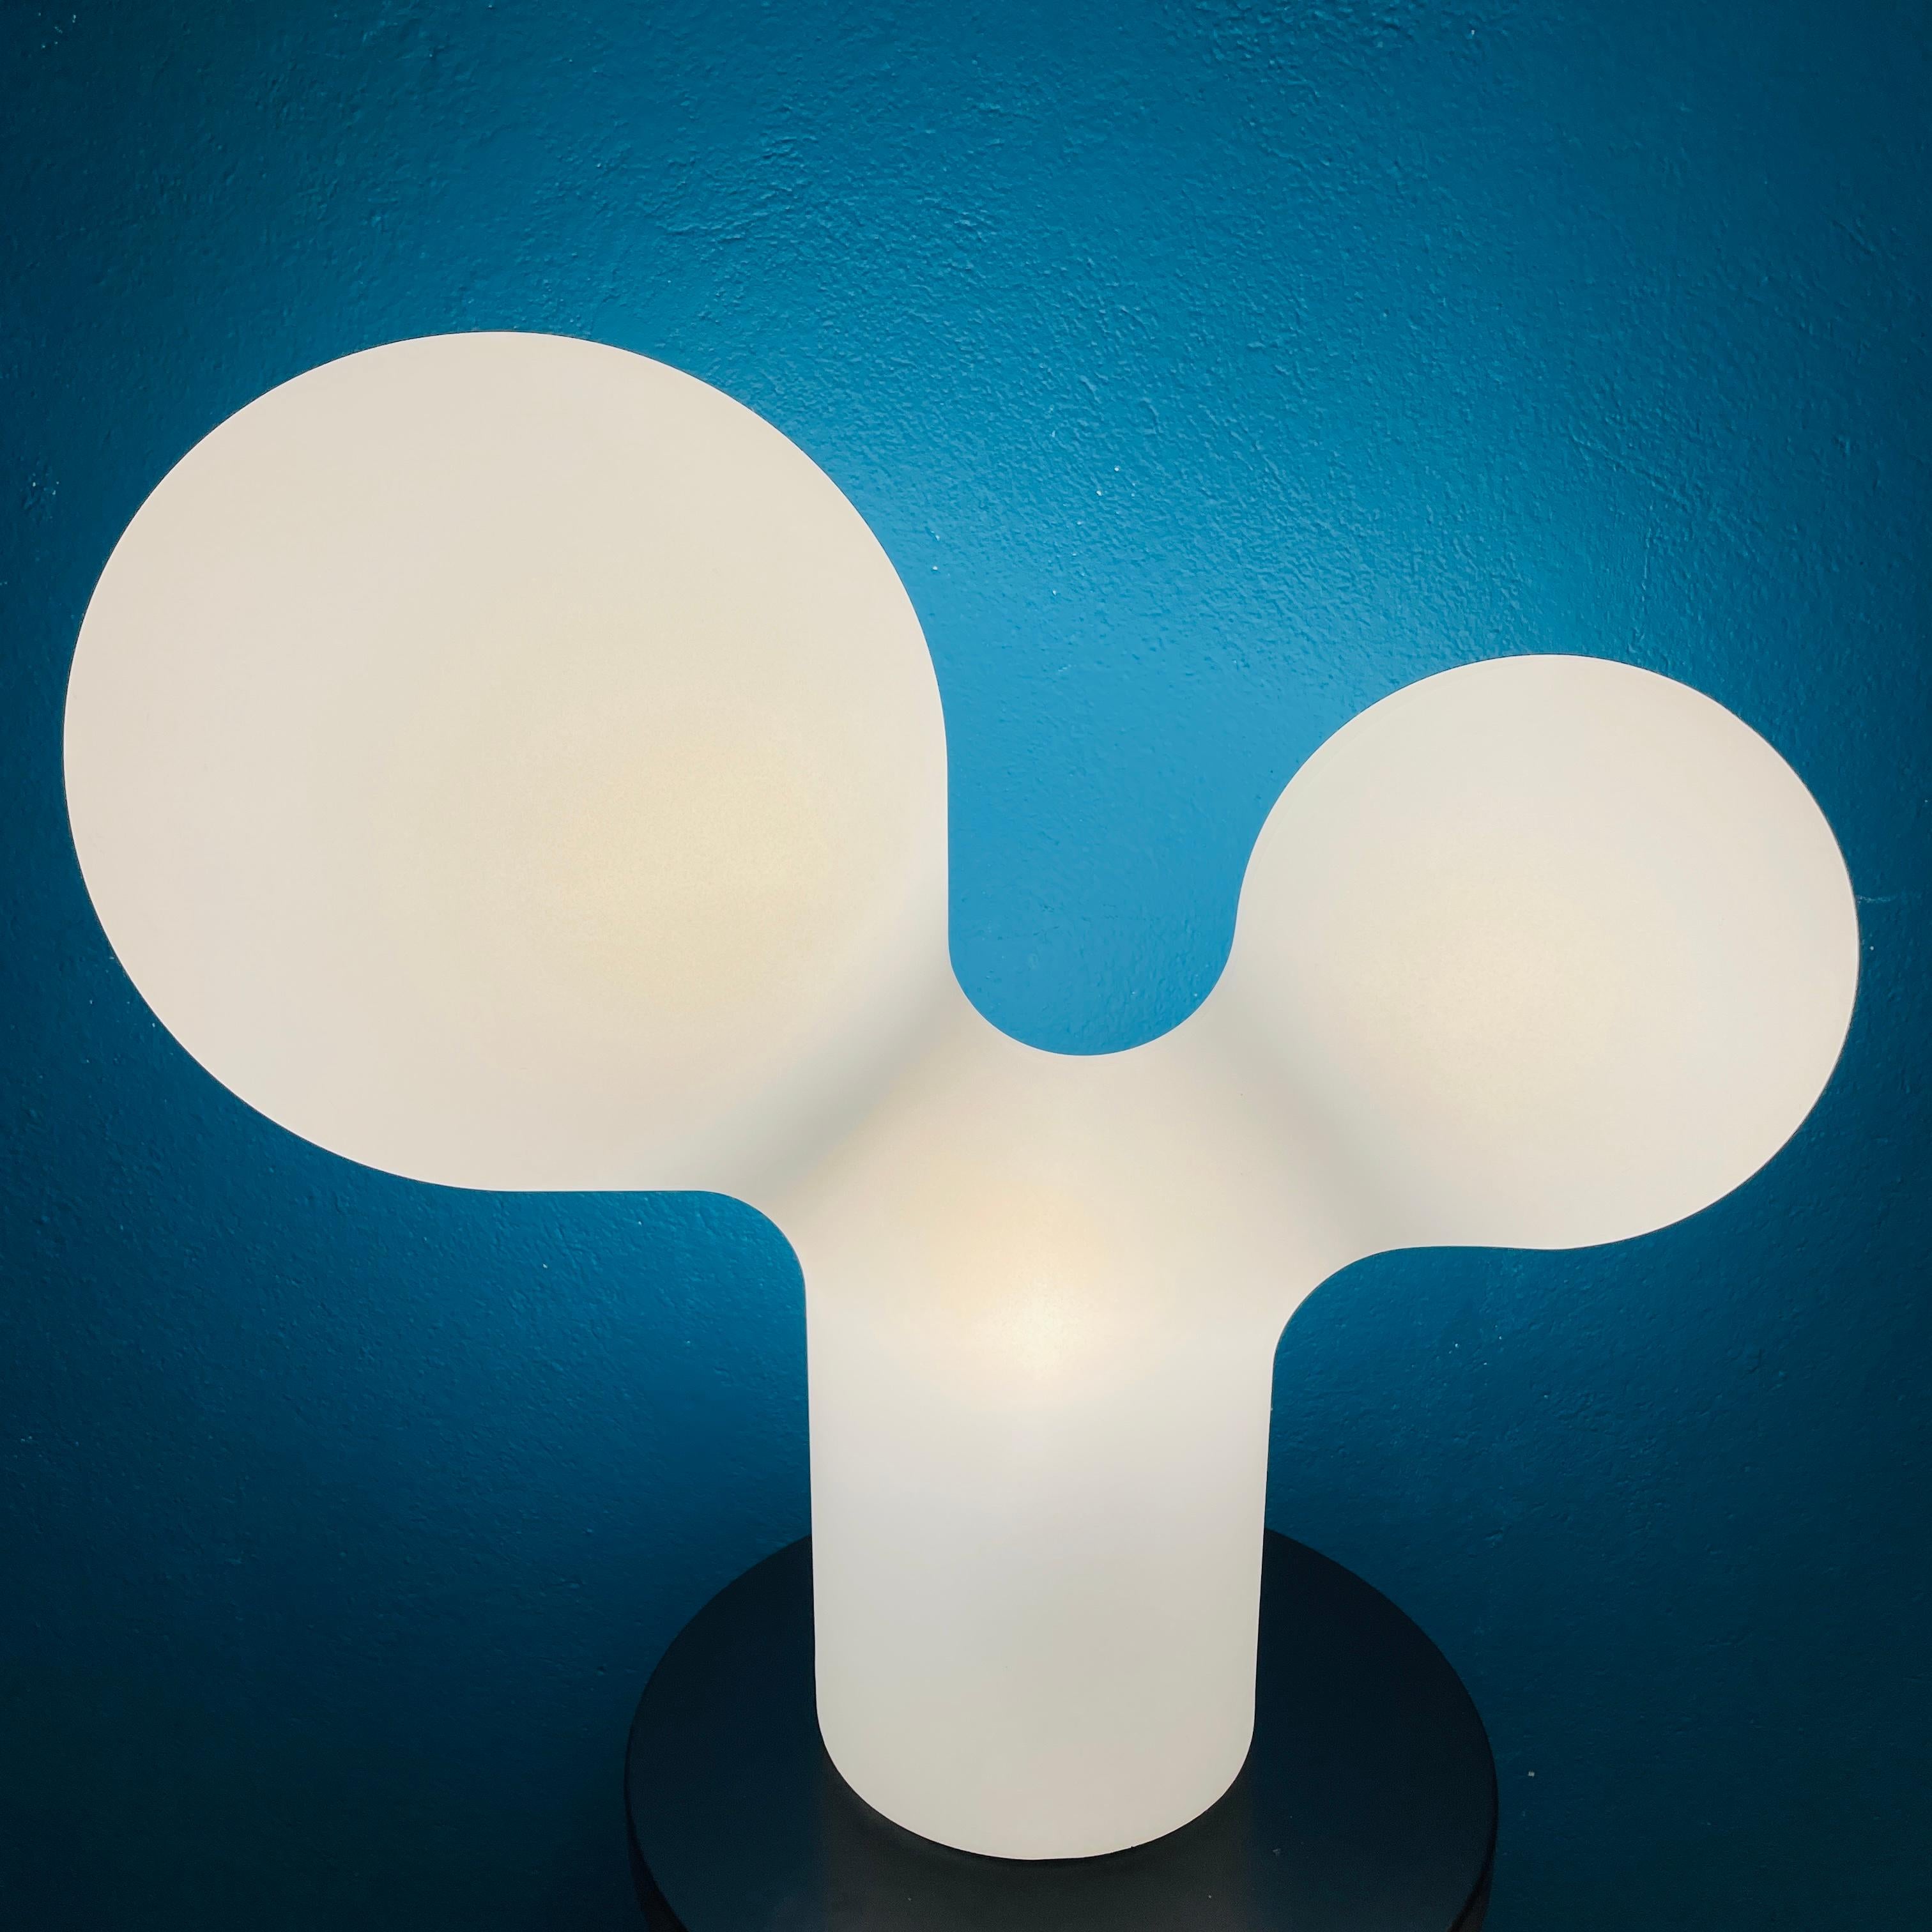 The Double Bubble lamp is a distinctive masterpiece designed by the celebrated Finnish designer Eero Aarnio in 2003. 

To light up evenly and smoothly its curvy shape, Double Bubble is fitted with three light sources: one in each bubble and one in